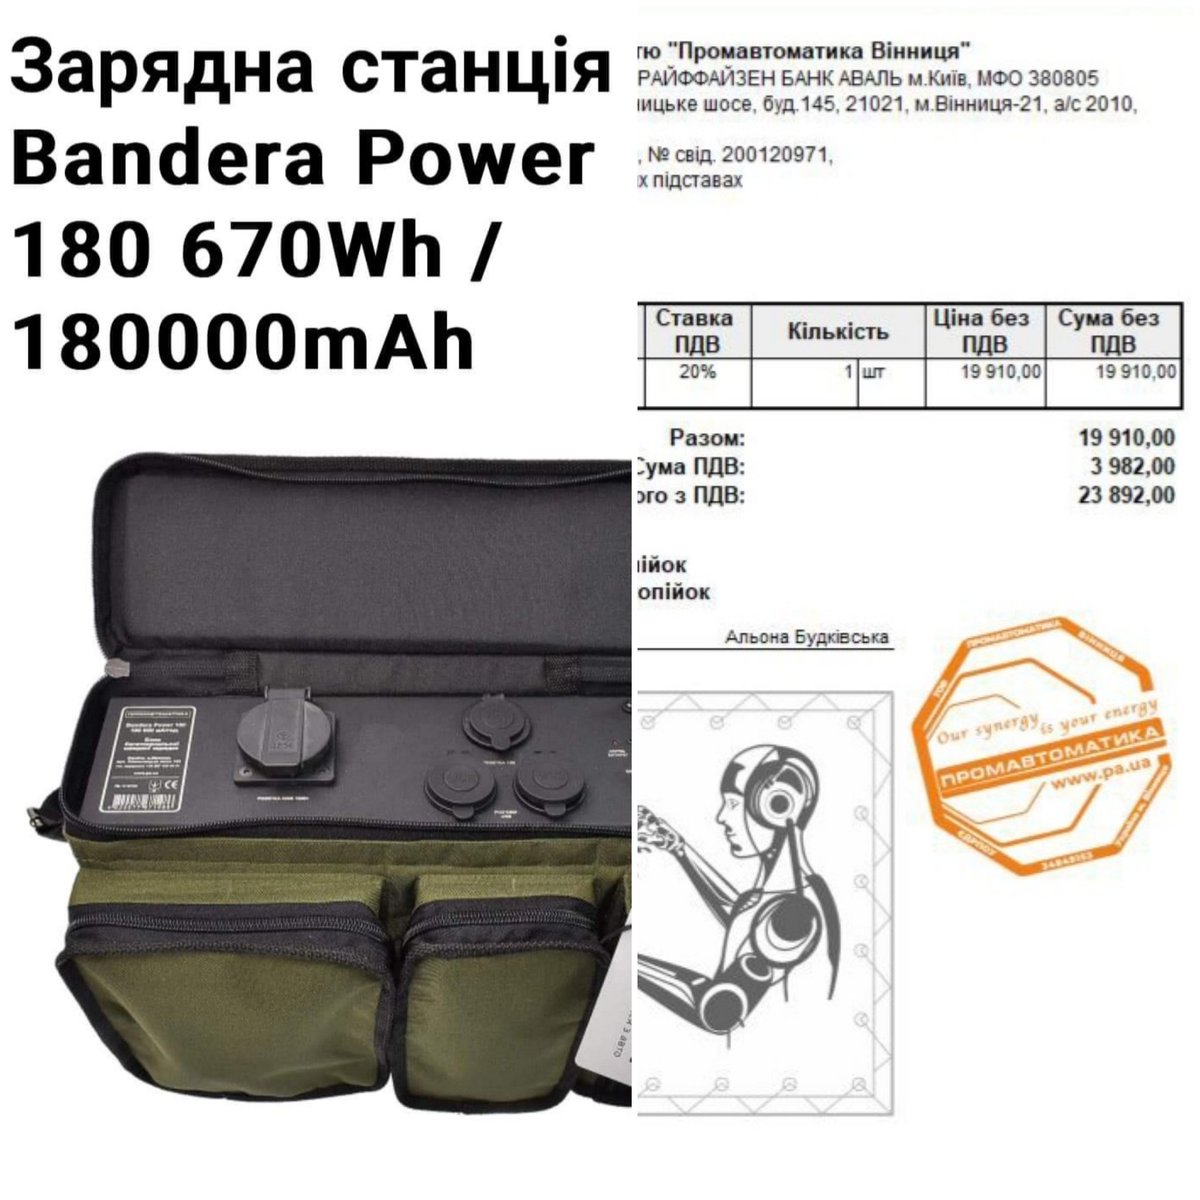 Friends, there is only $325 left until the end of the fundraising to purchase the Bandera Power 180 multi-charger! 
#AngelsZSU hope for your help, friends!🙏🏼🇺🇦
Pay Pal eurodekor7144773@ukr.net